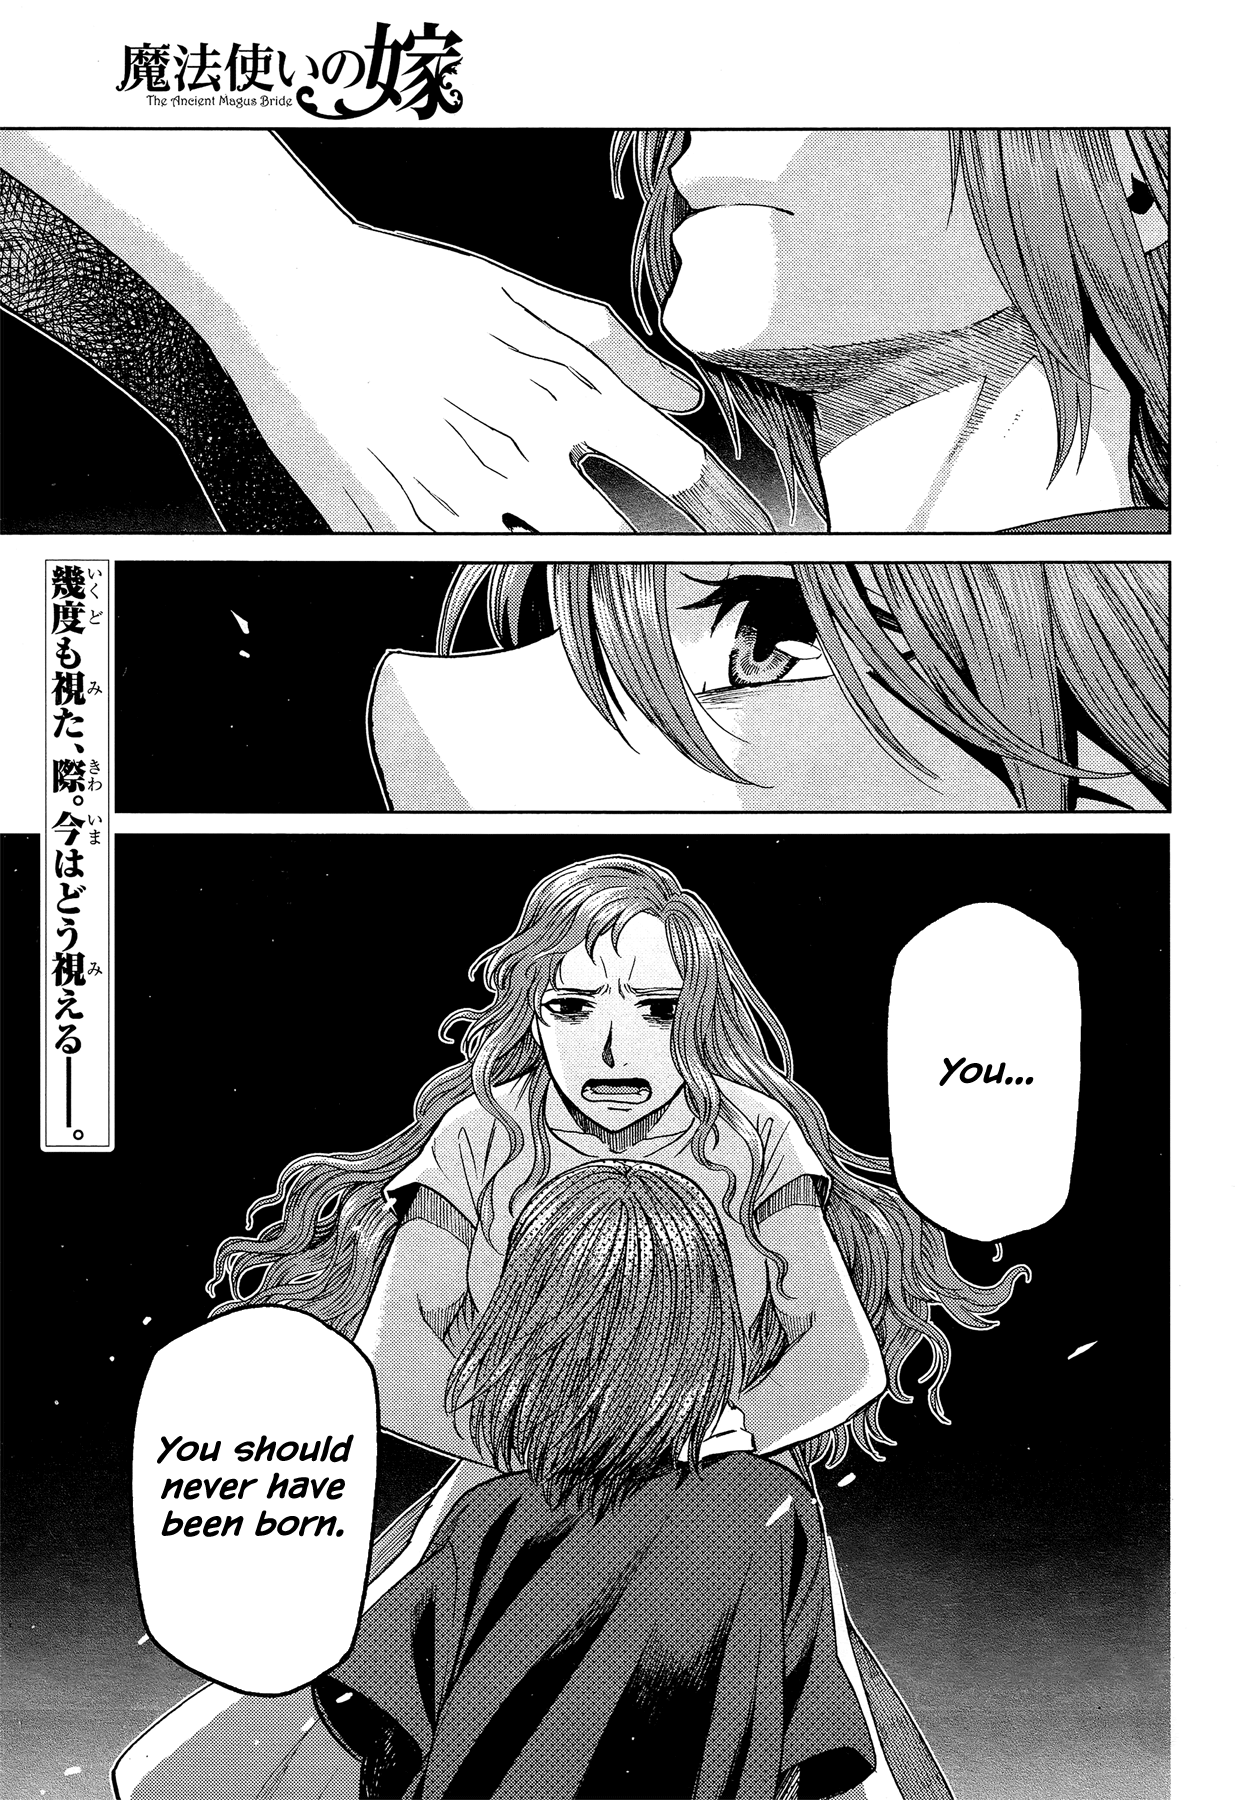 Mahoutsukai no Yome Vol.9-Chapter.43-The-Road-To-Hell-is-Paved-With-Good-intentions Image